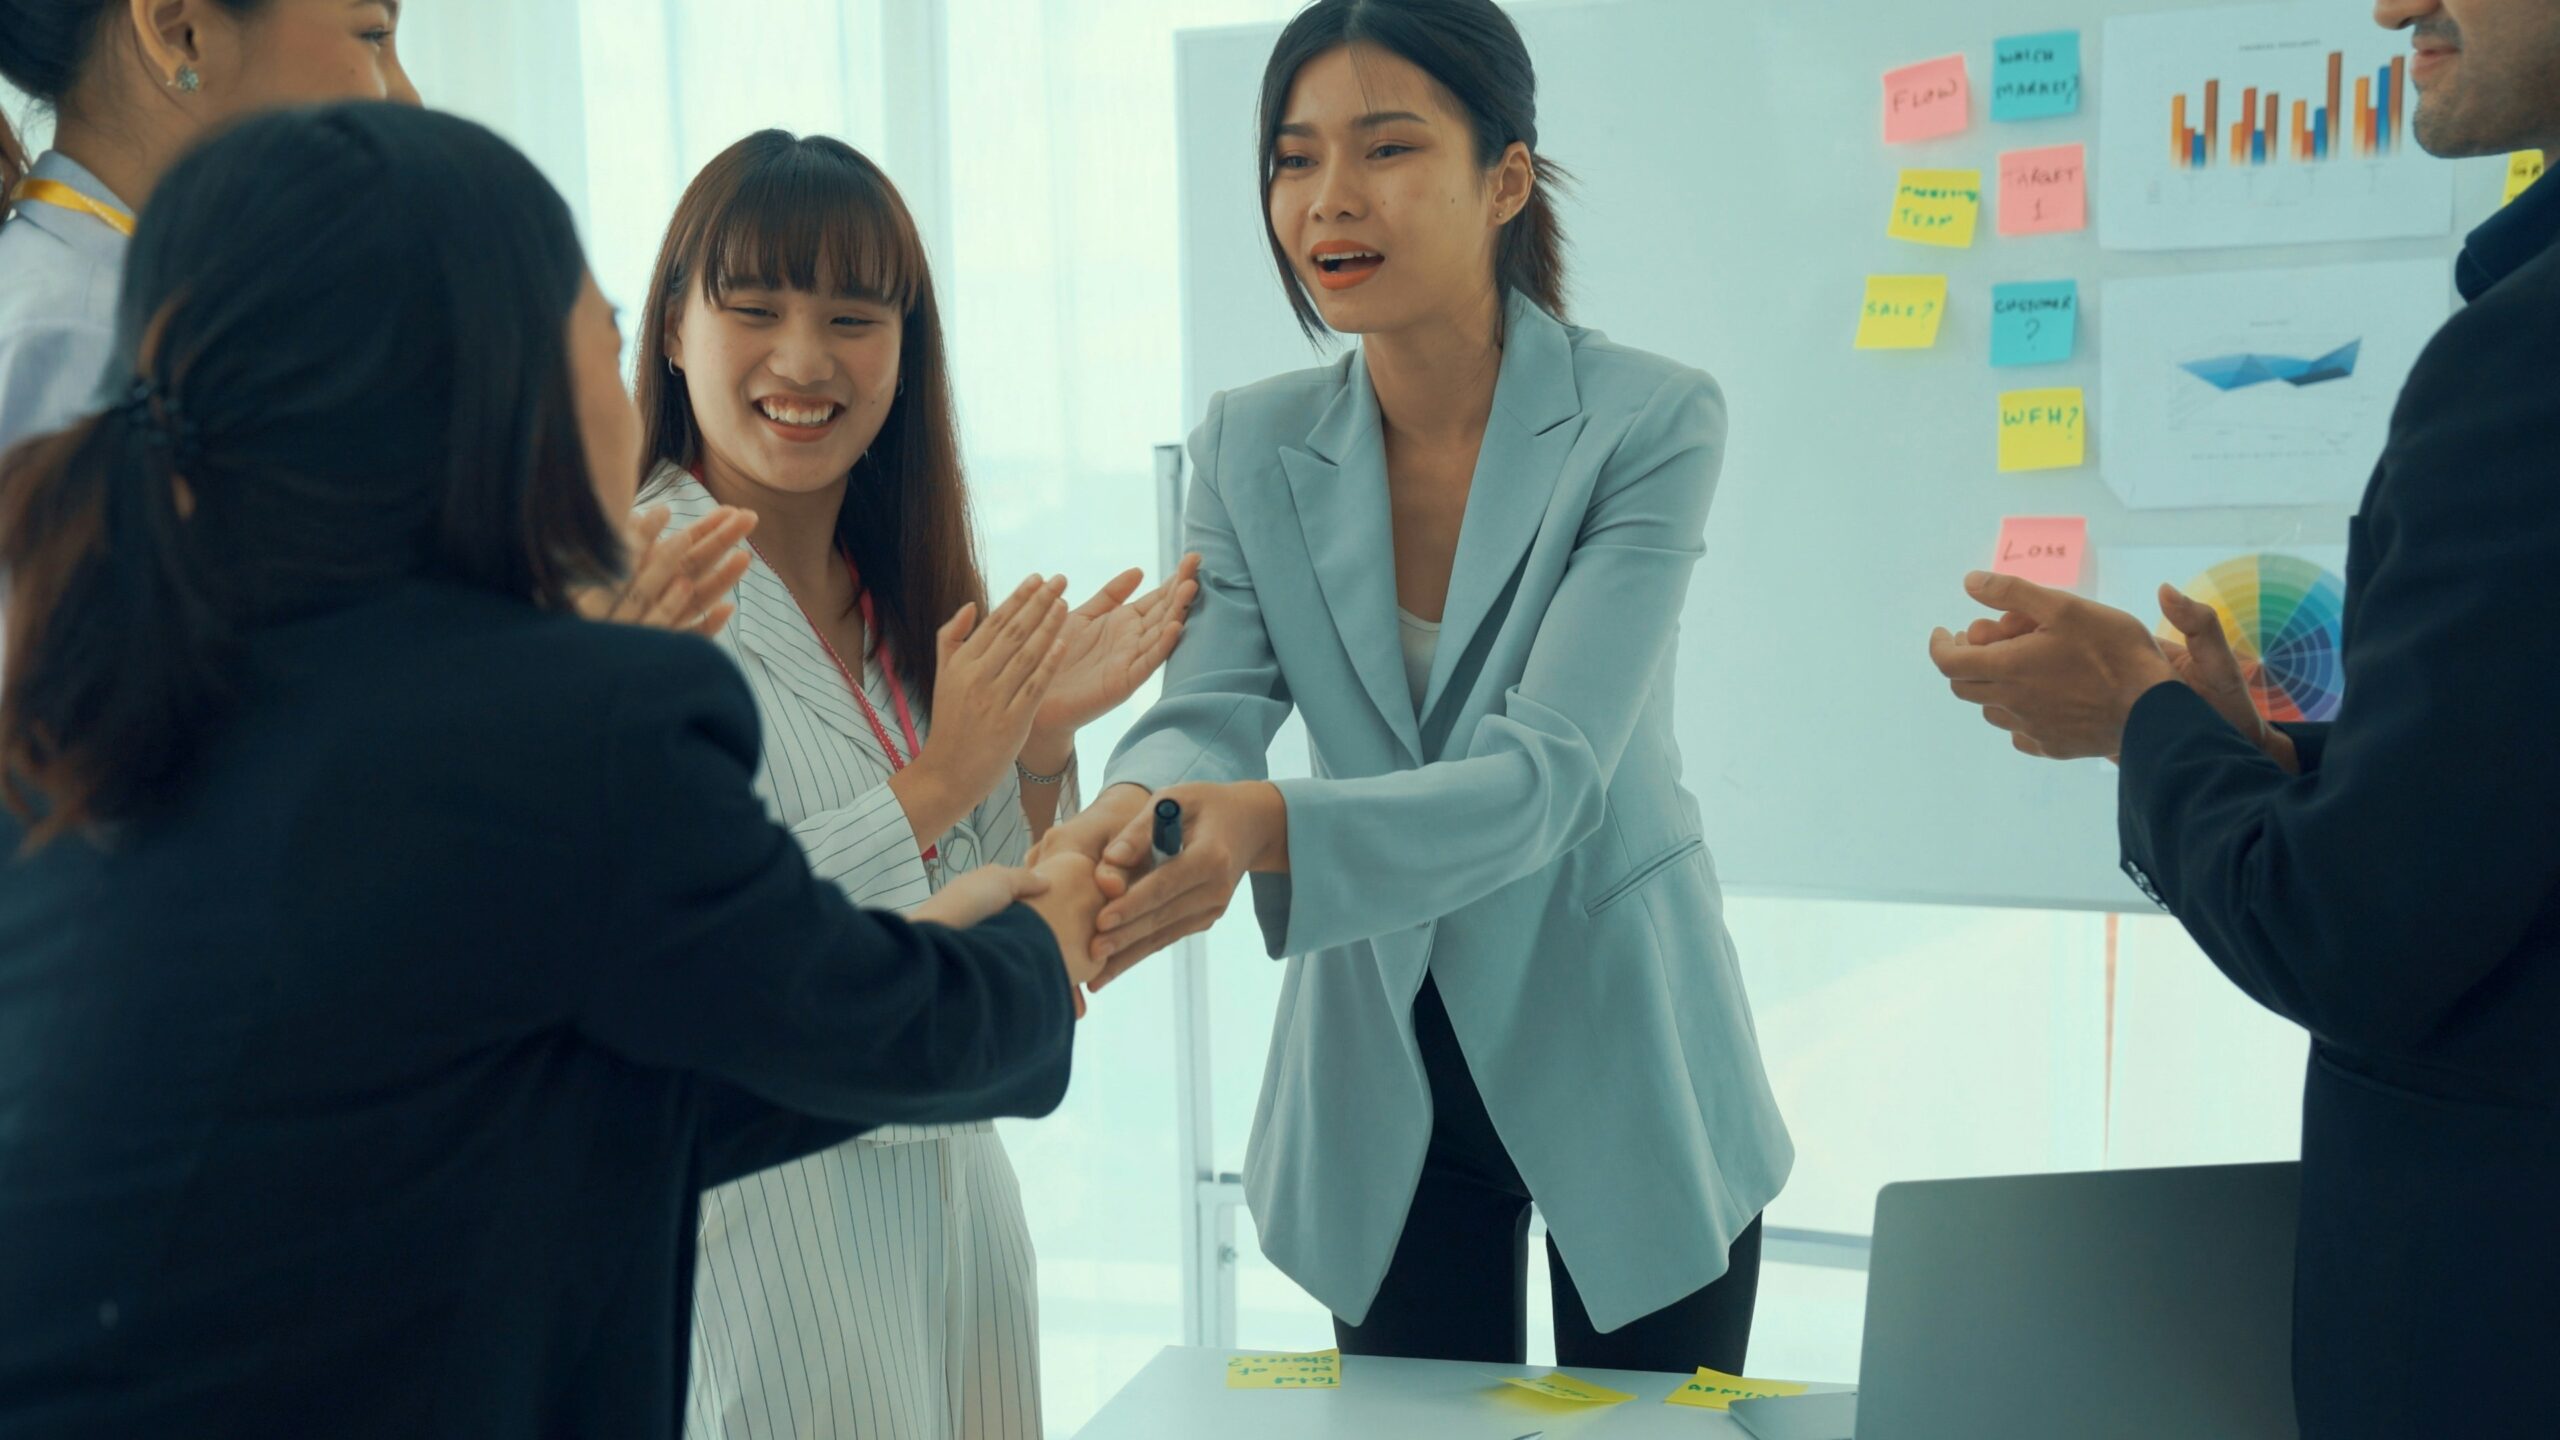 A group of five diverse business professionals celebrating the successful implementation of IT service management principles and practices in an office, clapping and shaking hands near a whiteboard with charts.